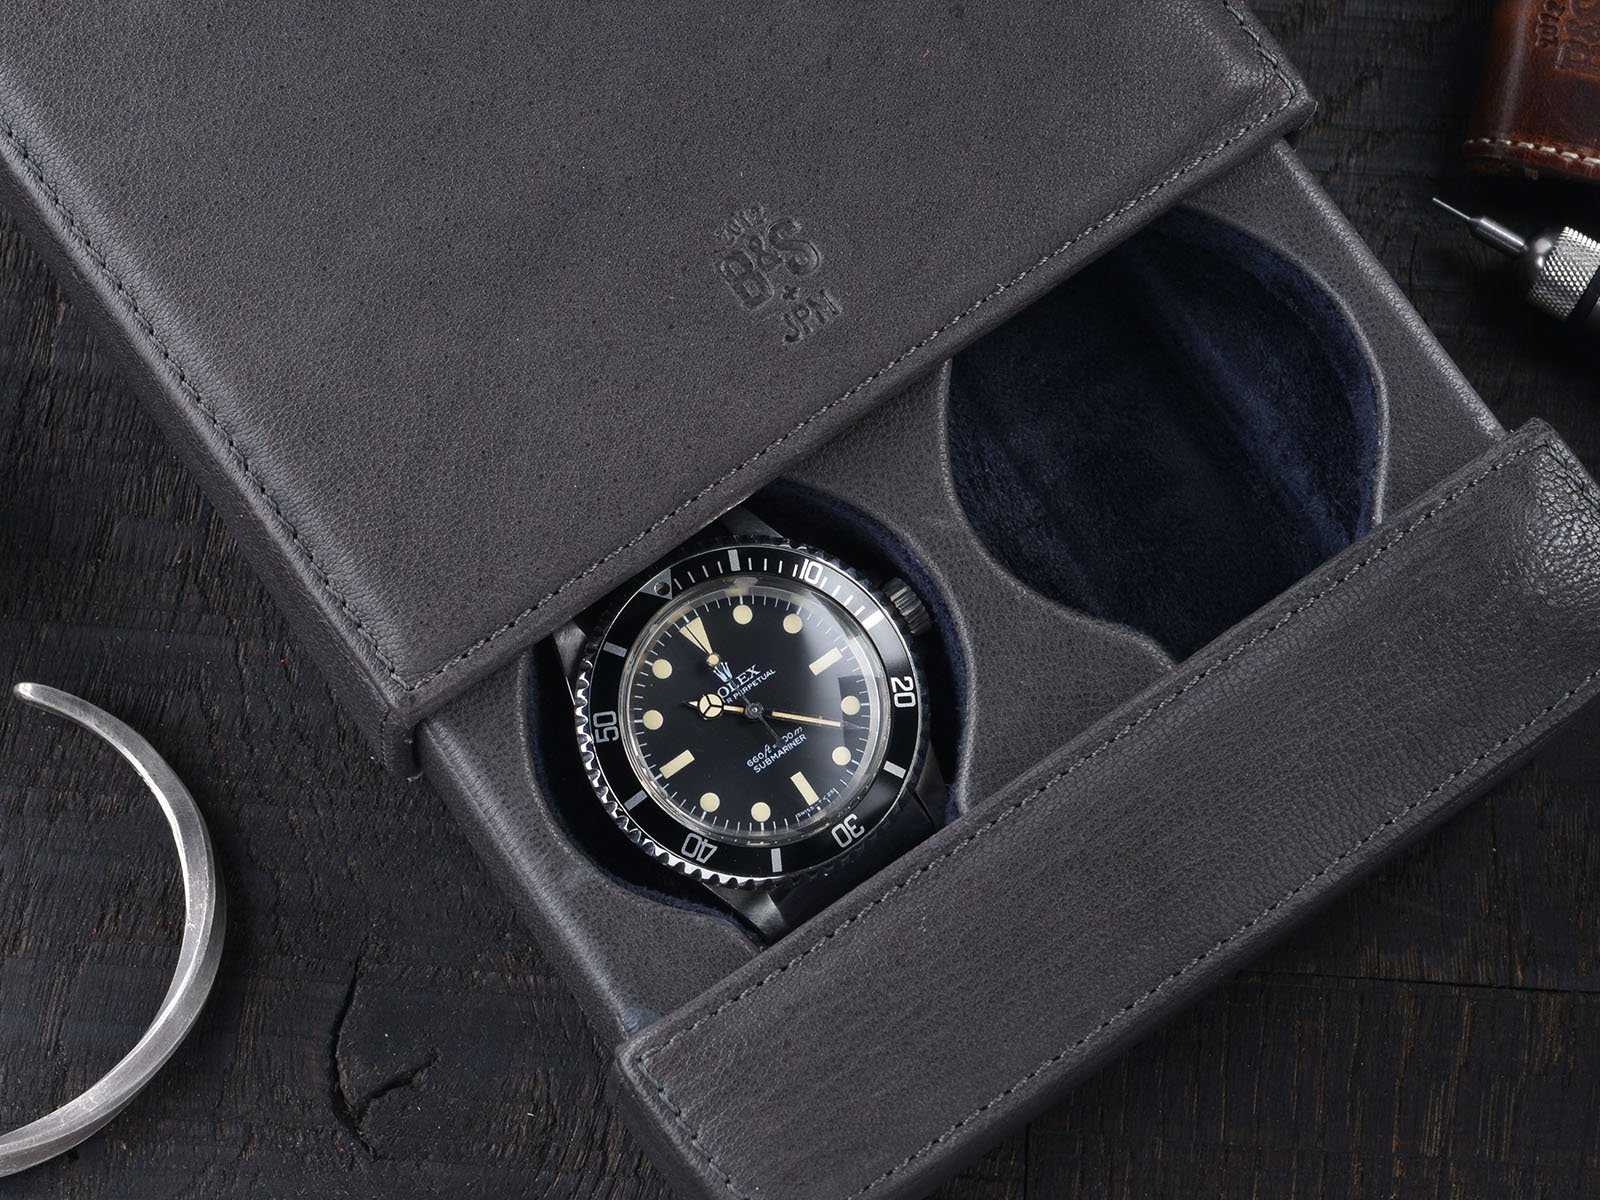 ROLEX 5513 PRE-COMEX DIAL SUBMARINER FROM 1977